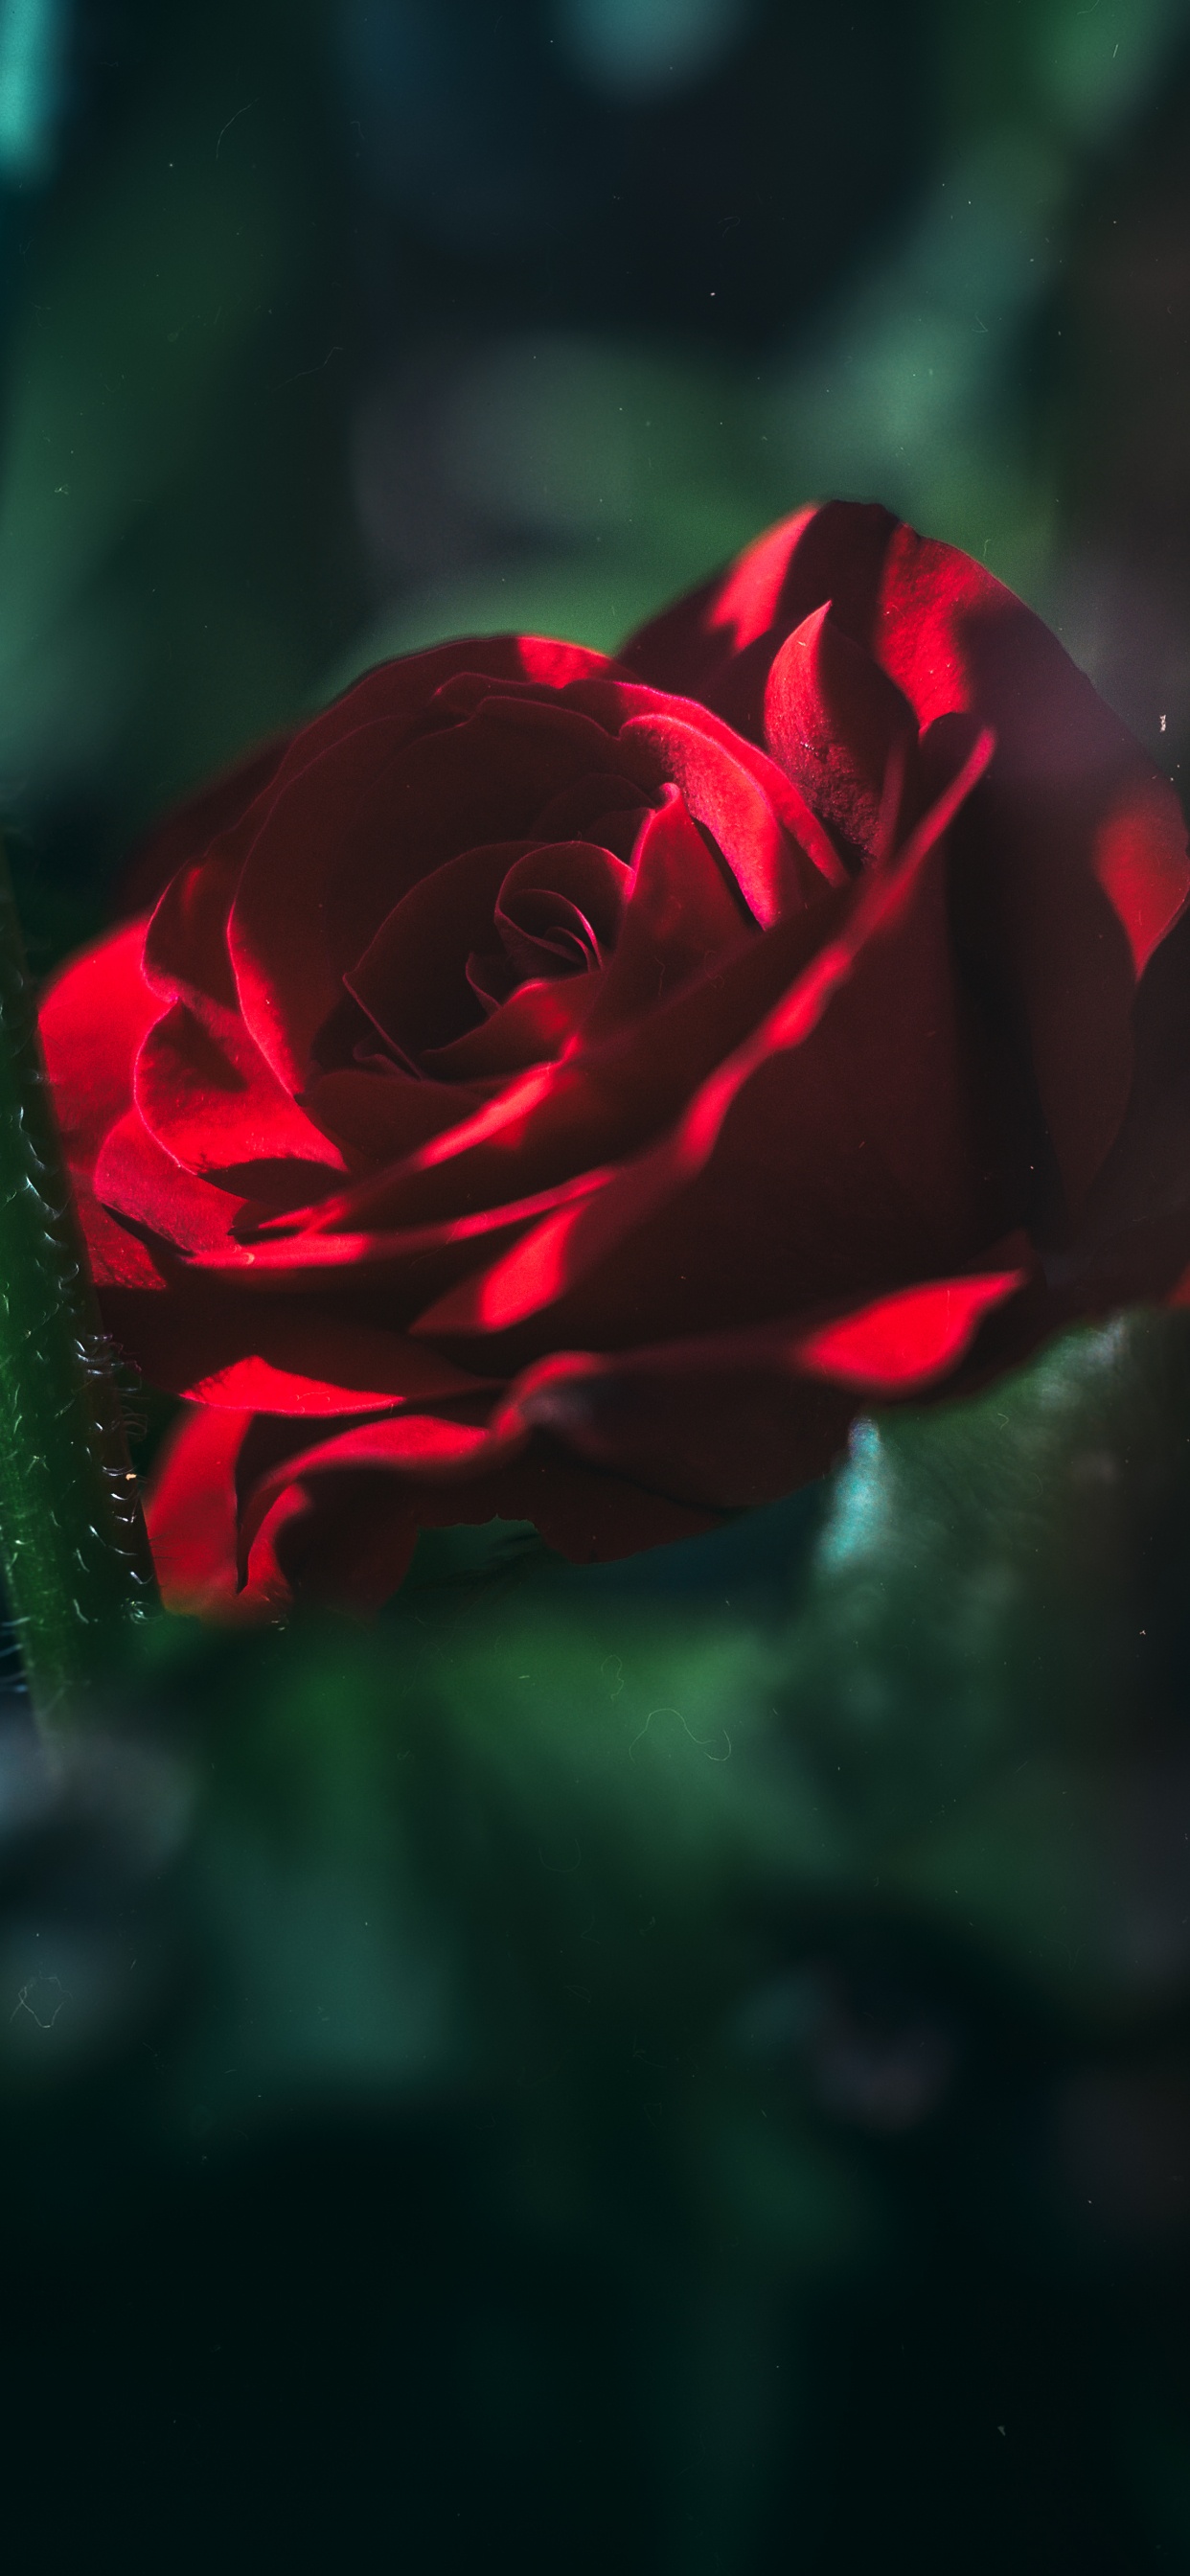 Red Rose in Bloom in Close up Photography. Wallpaper in 1242x2688 Resolution